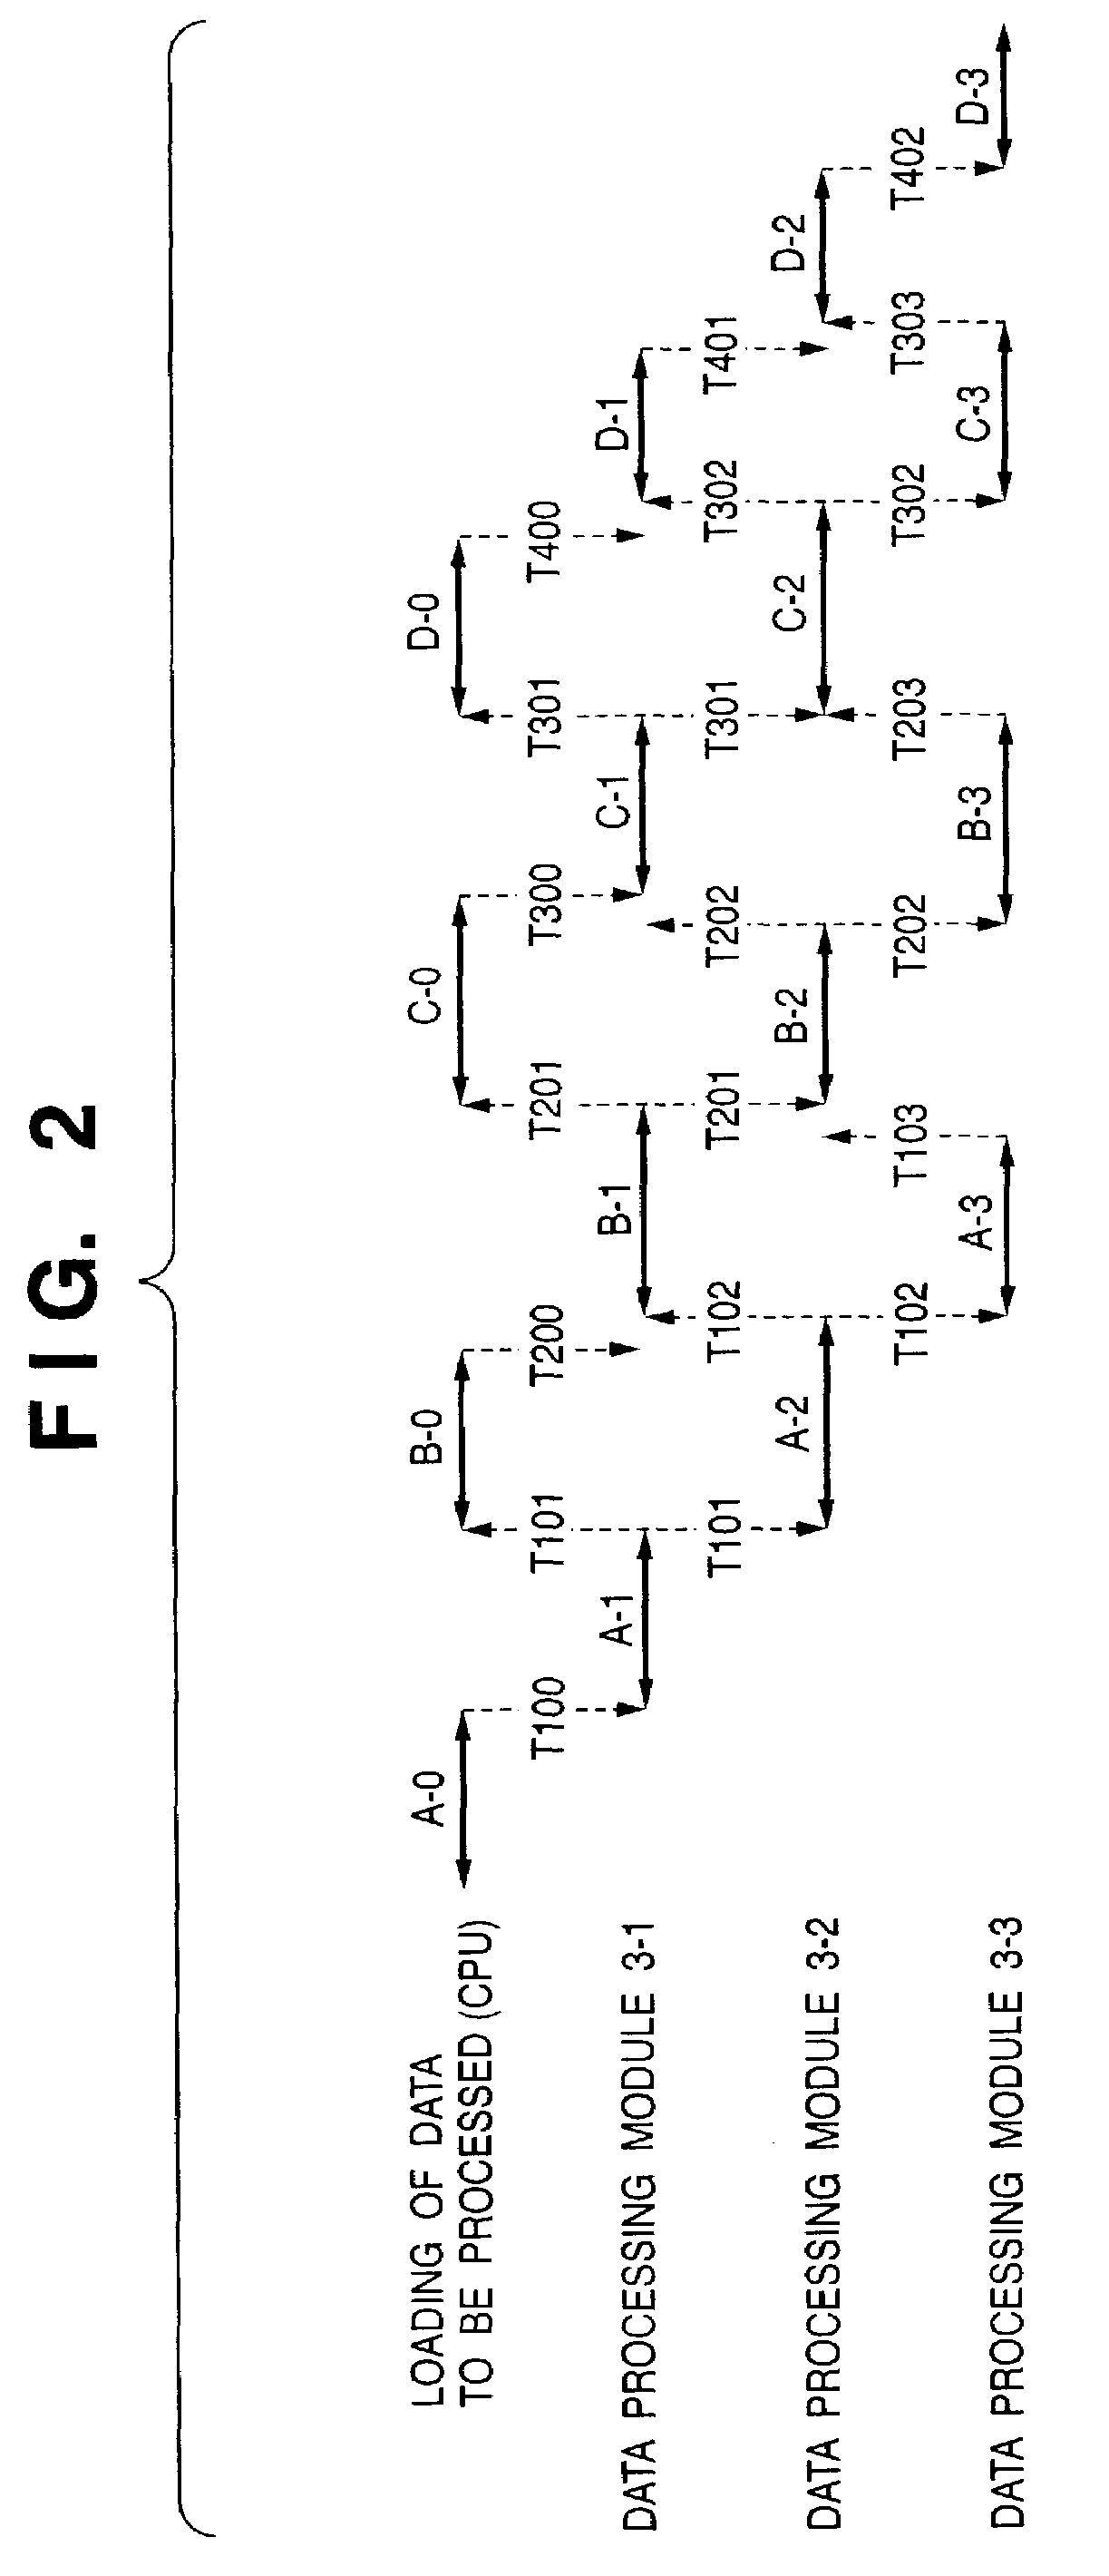 Data processing apparatus, image processing apparatus, and method therefor